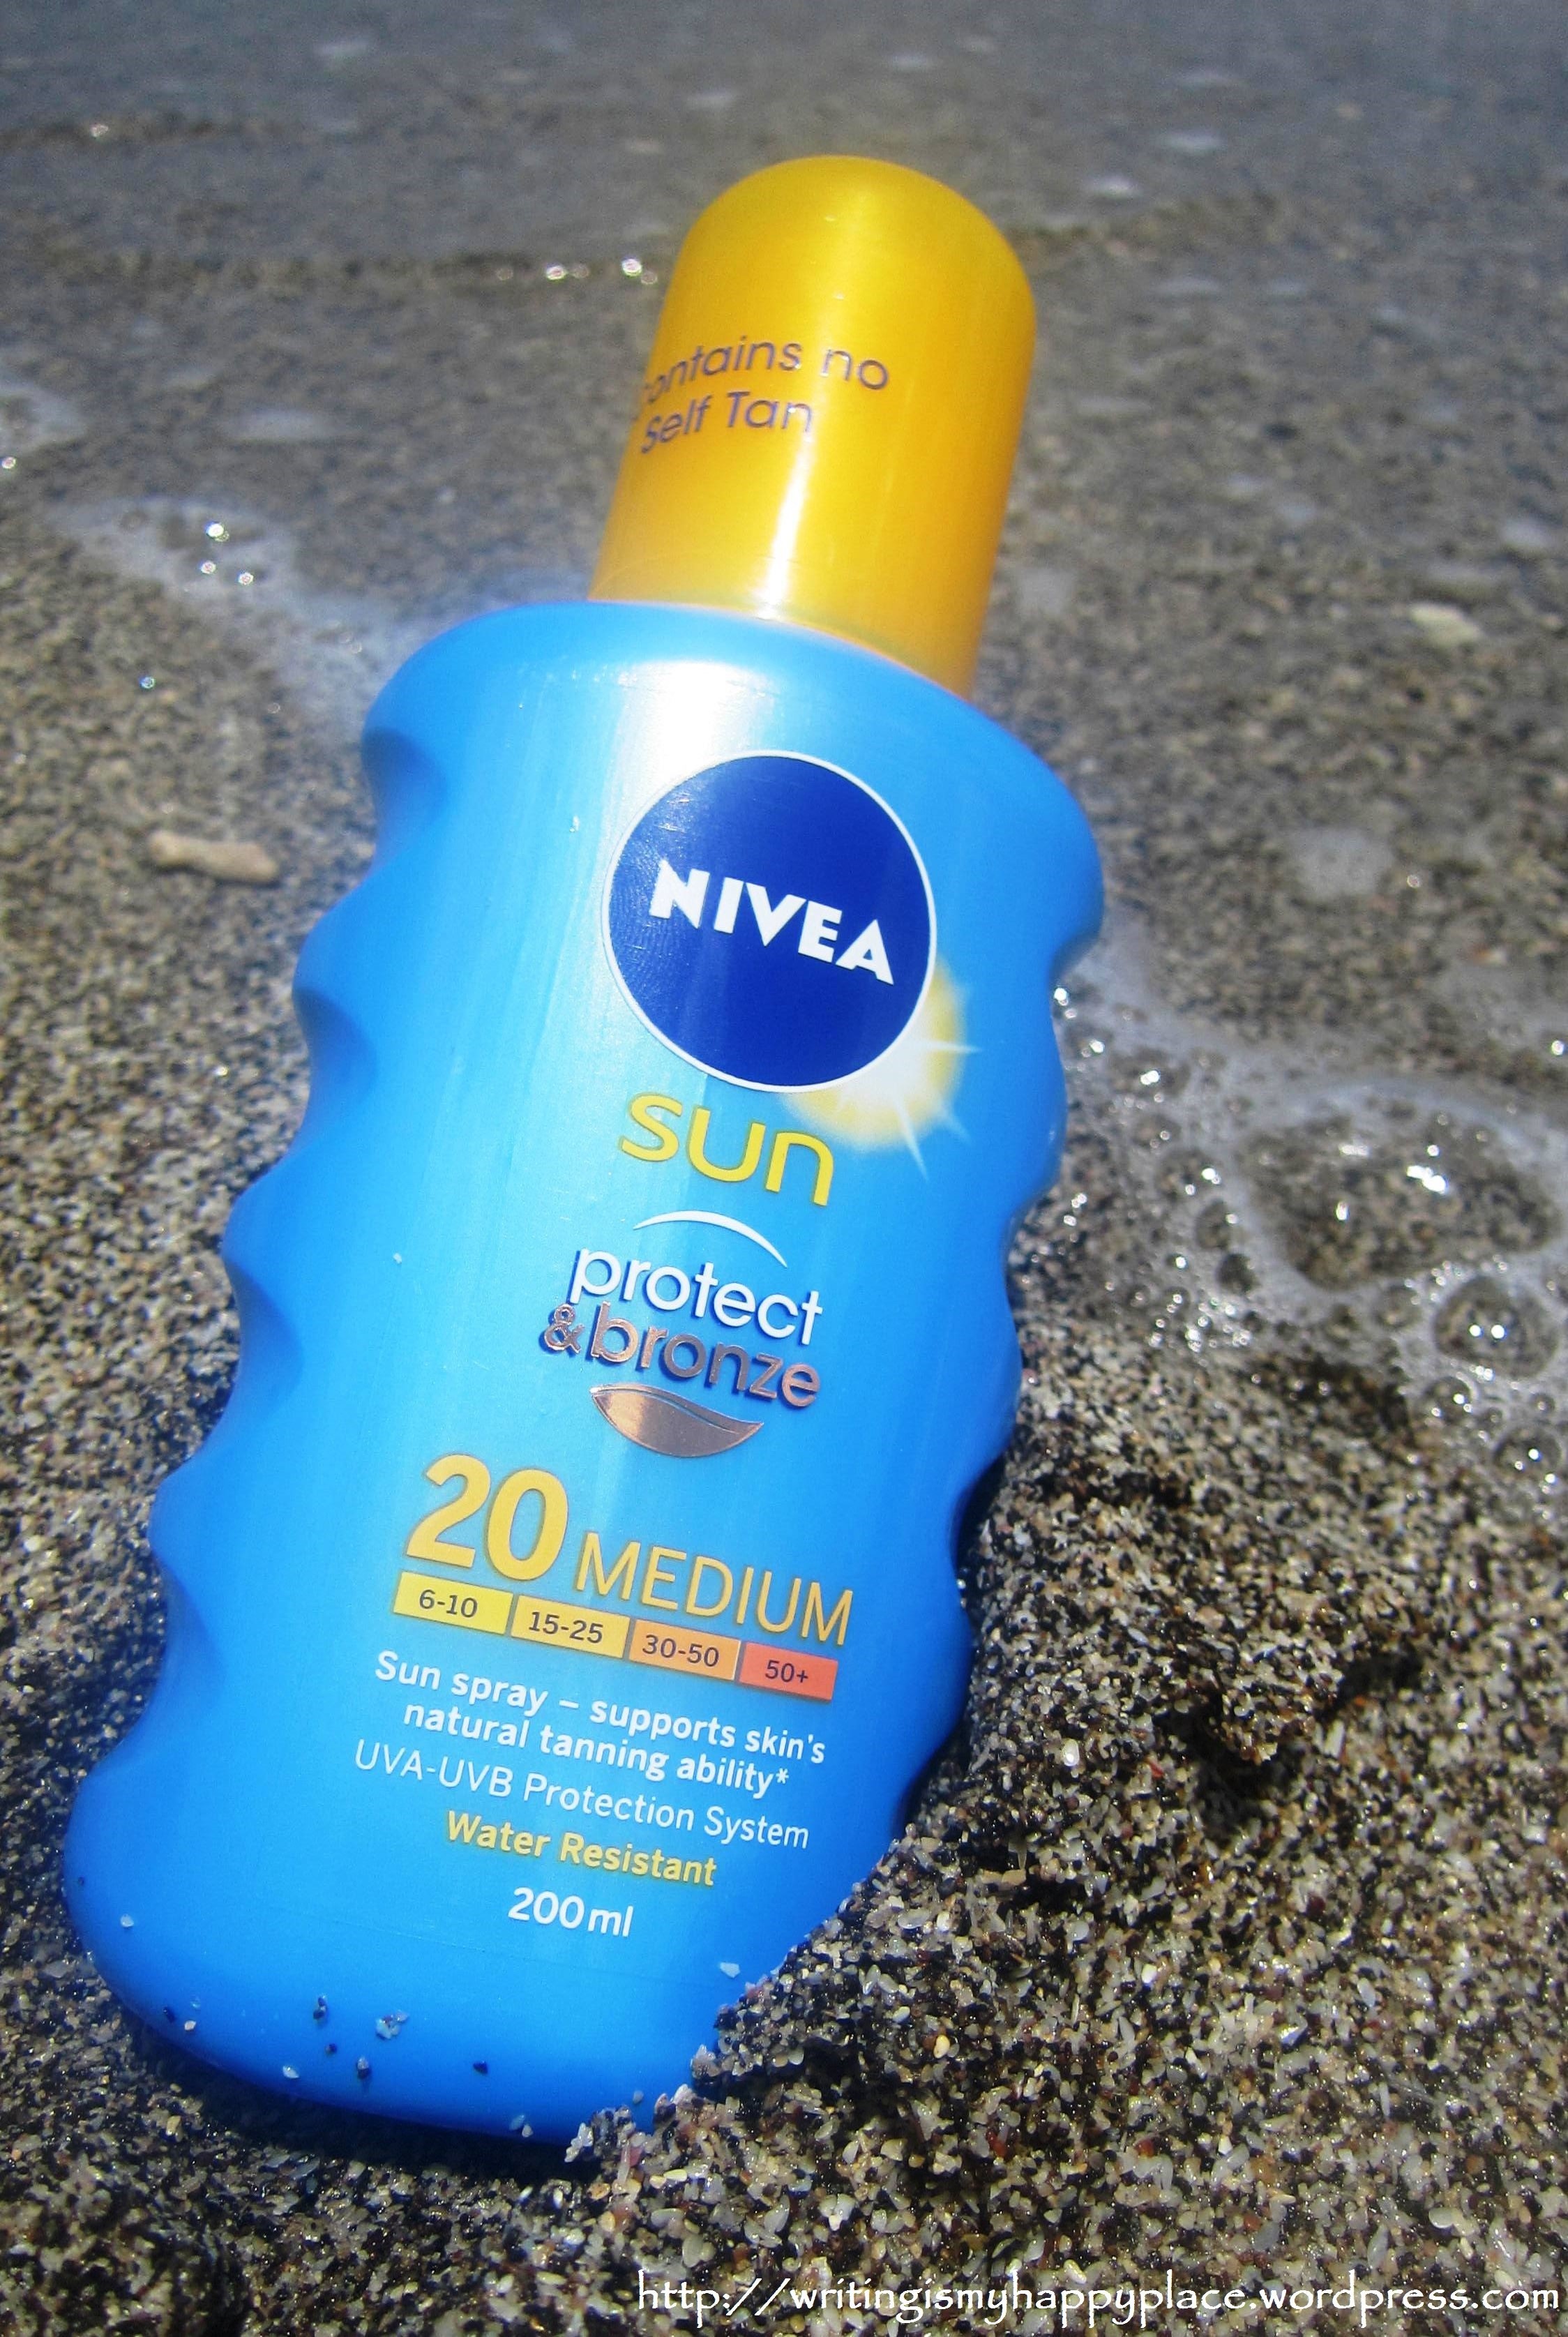 Roux Kan worden genegeerd strategie Nivea Sun Protect and Bronze Spray SPF 20 | Safe and Tanned Under the Sun |  writingismyhappyplace